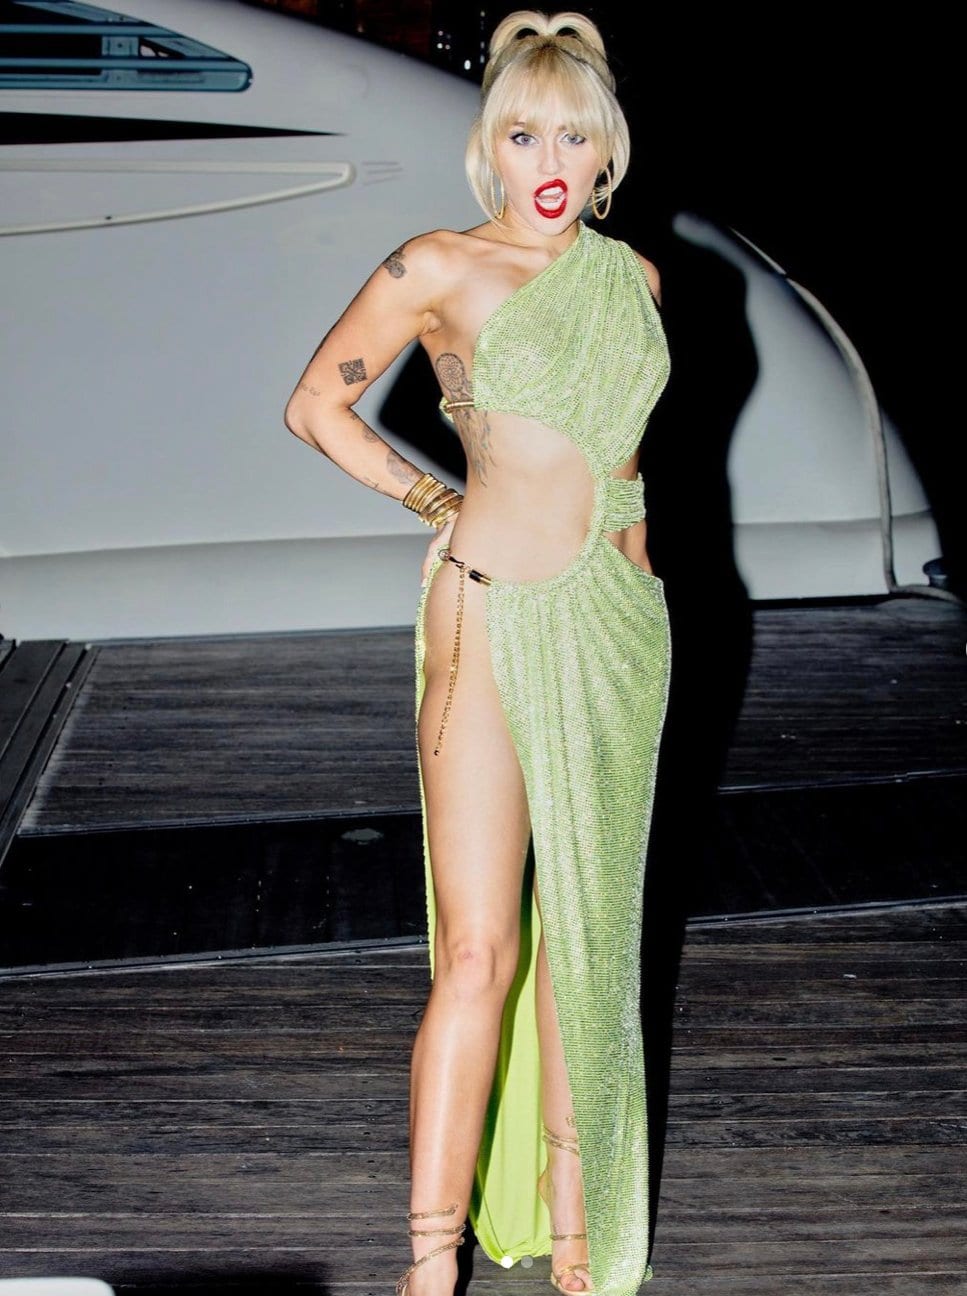 Miley Cyrus flashes her toned abs and legs in Bronx and Banco’s Spring 2022 green dress and Rene Caovilla gold heels